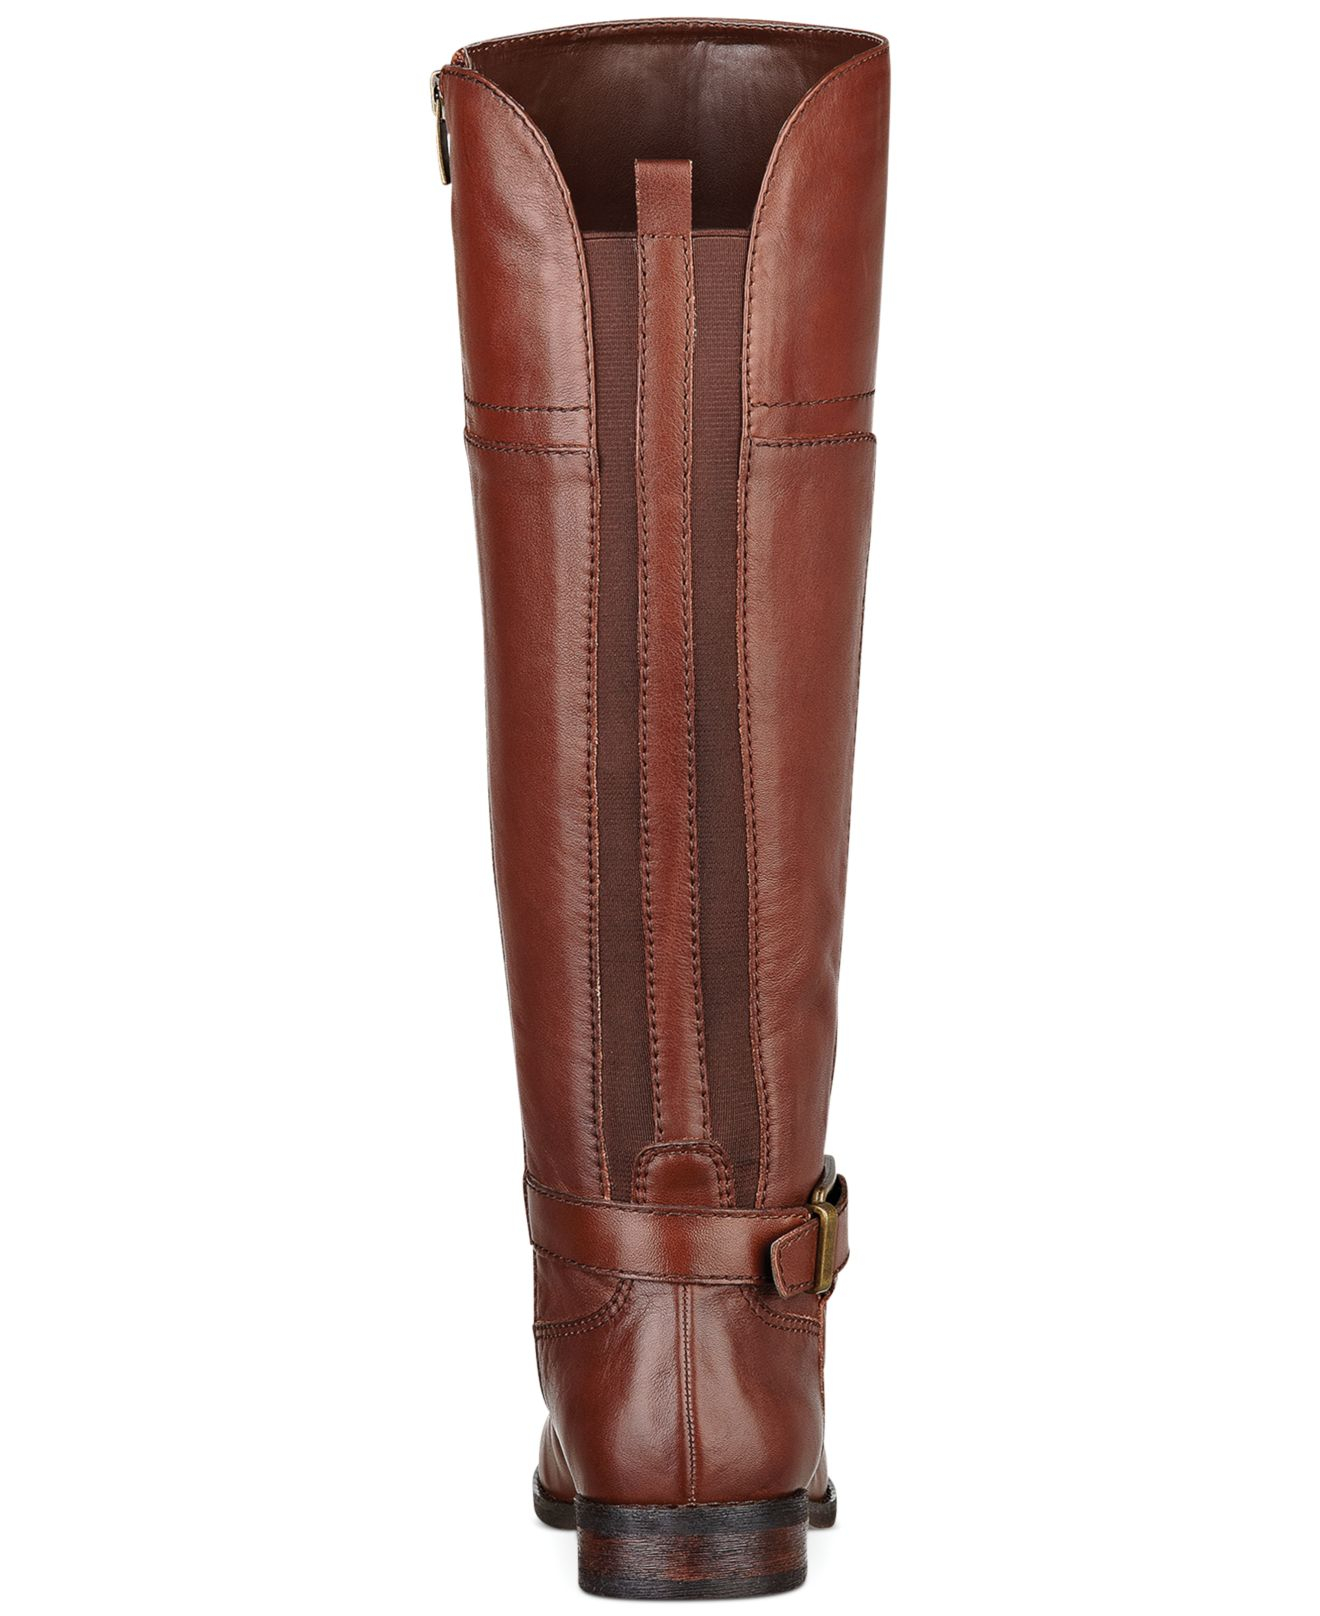 Lyst - Marc Fisher Aysha Tall Wide Calf Riding Boots in Brown